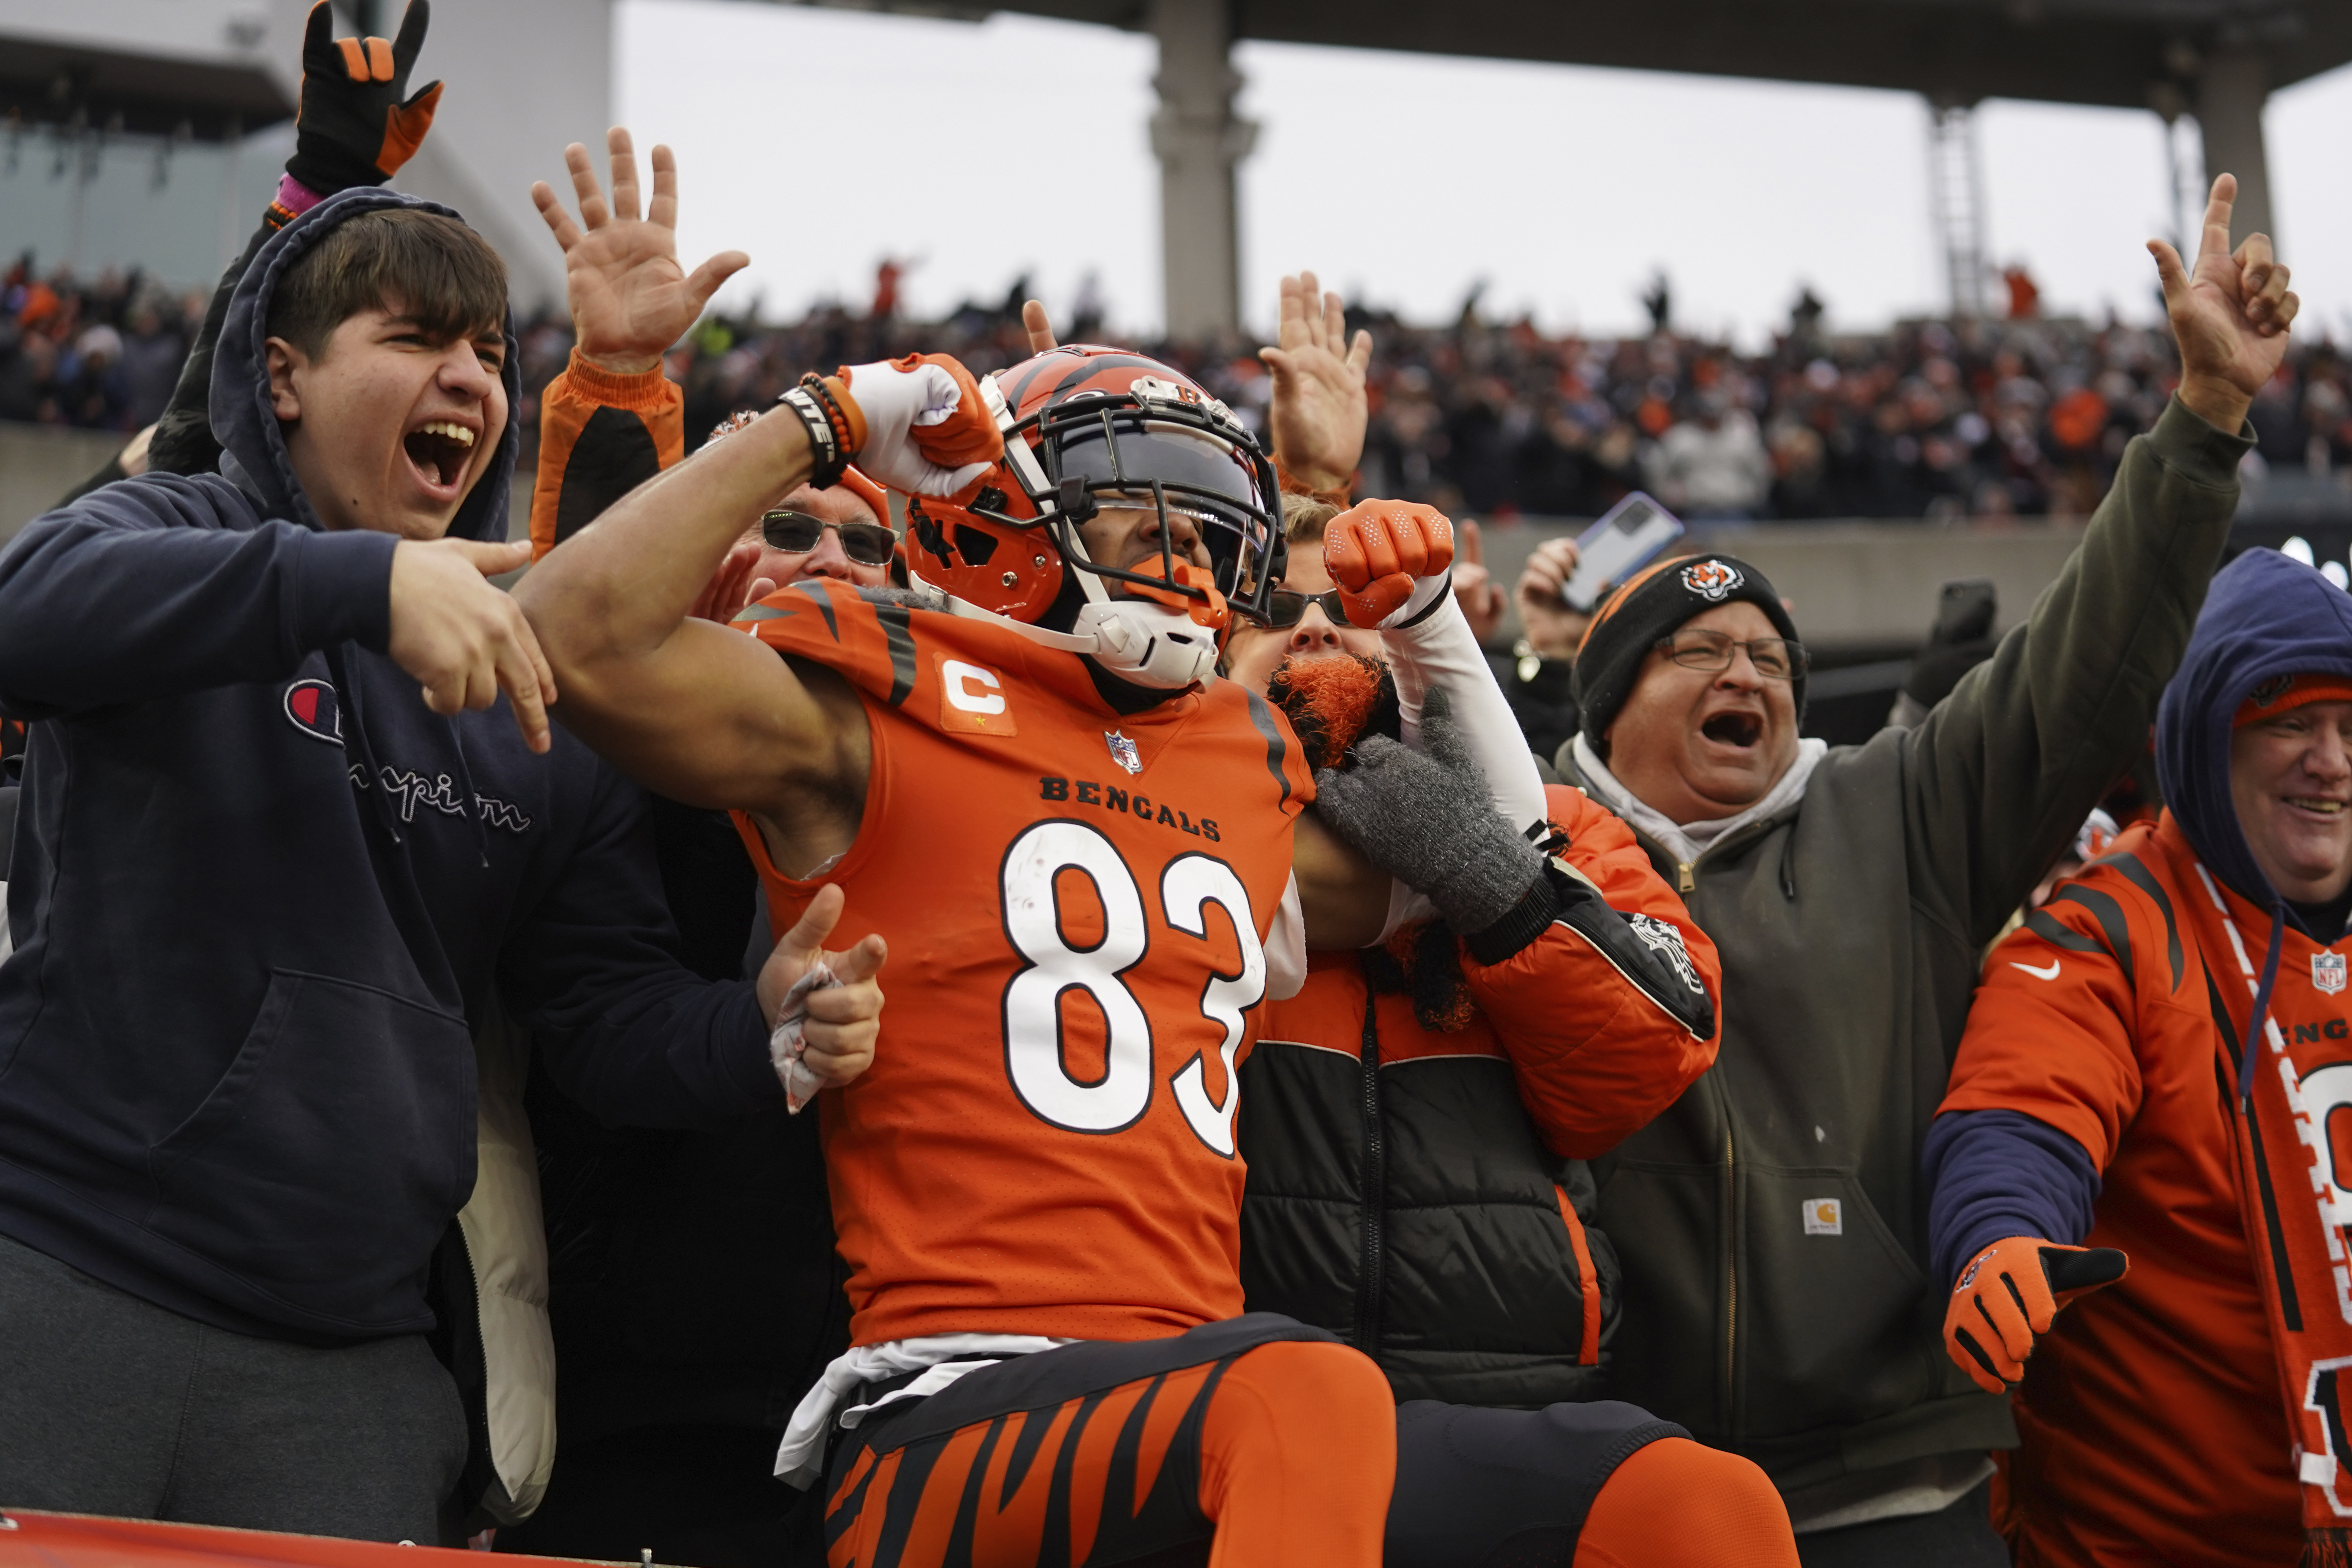 Bengals rally past Chiefs 34-31, clinch AFC North title